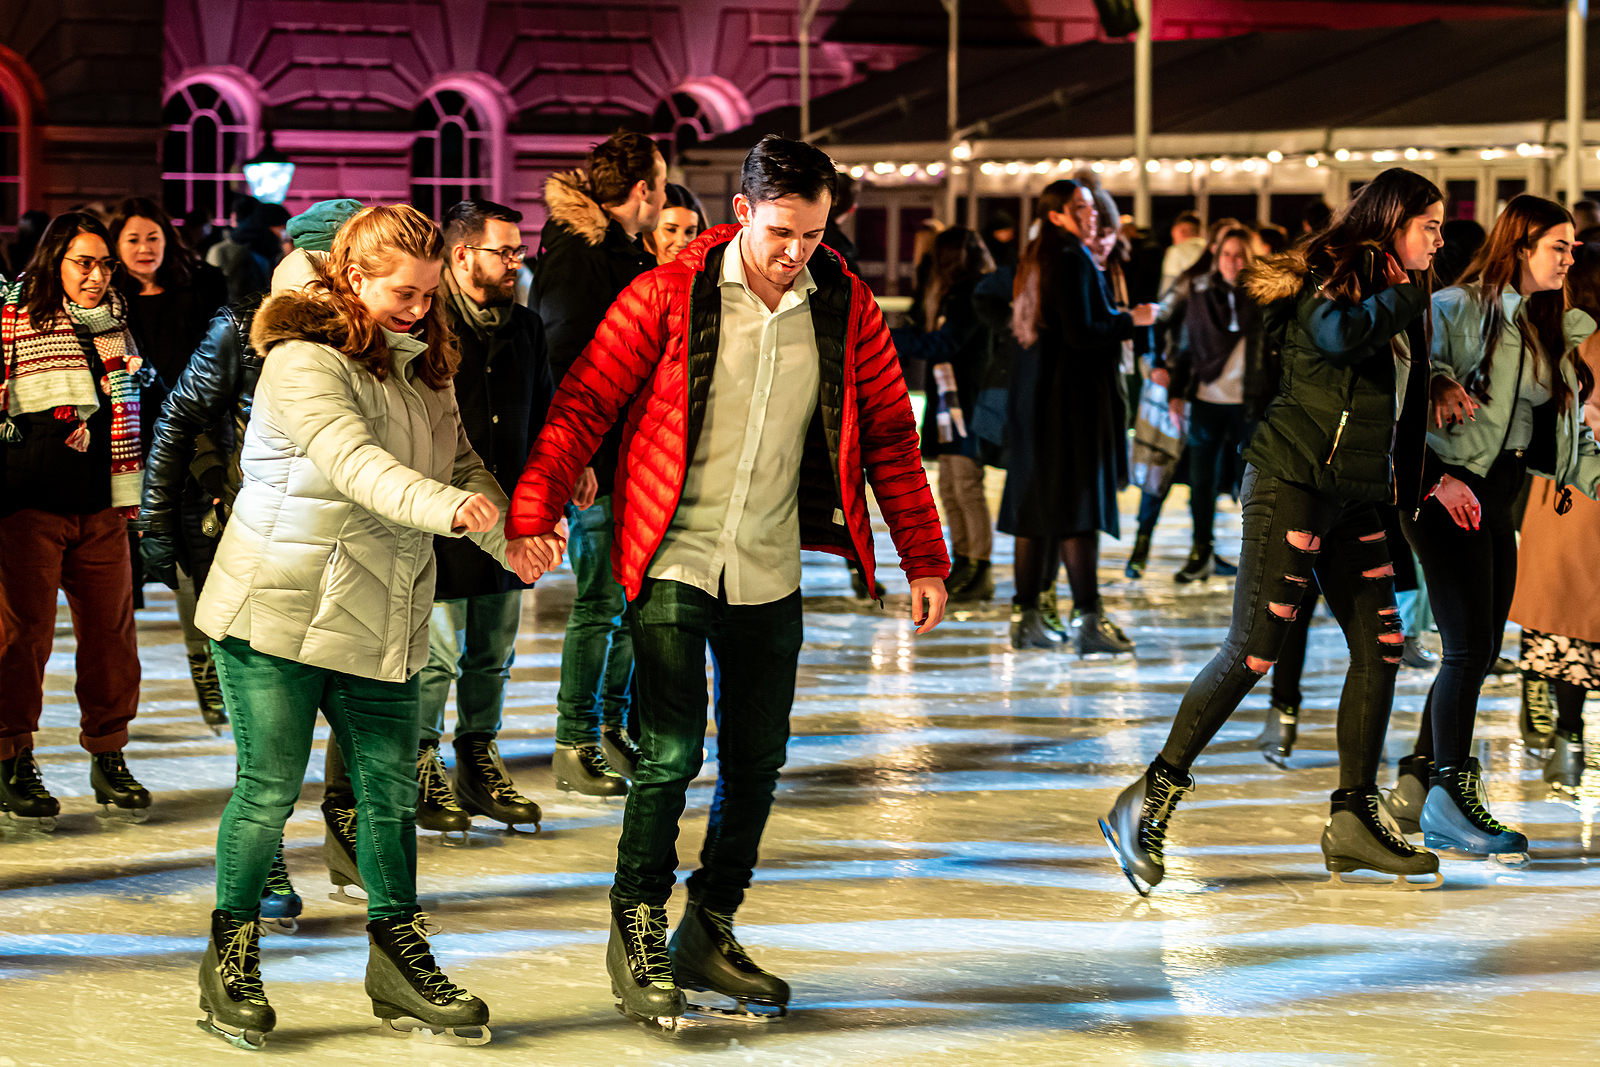 London, England, UK - January 2, 2020: Skaters Beating the Winter Blues at the Annual Christmas Ice Rink at the Historic Somerset House